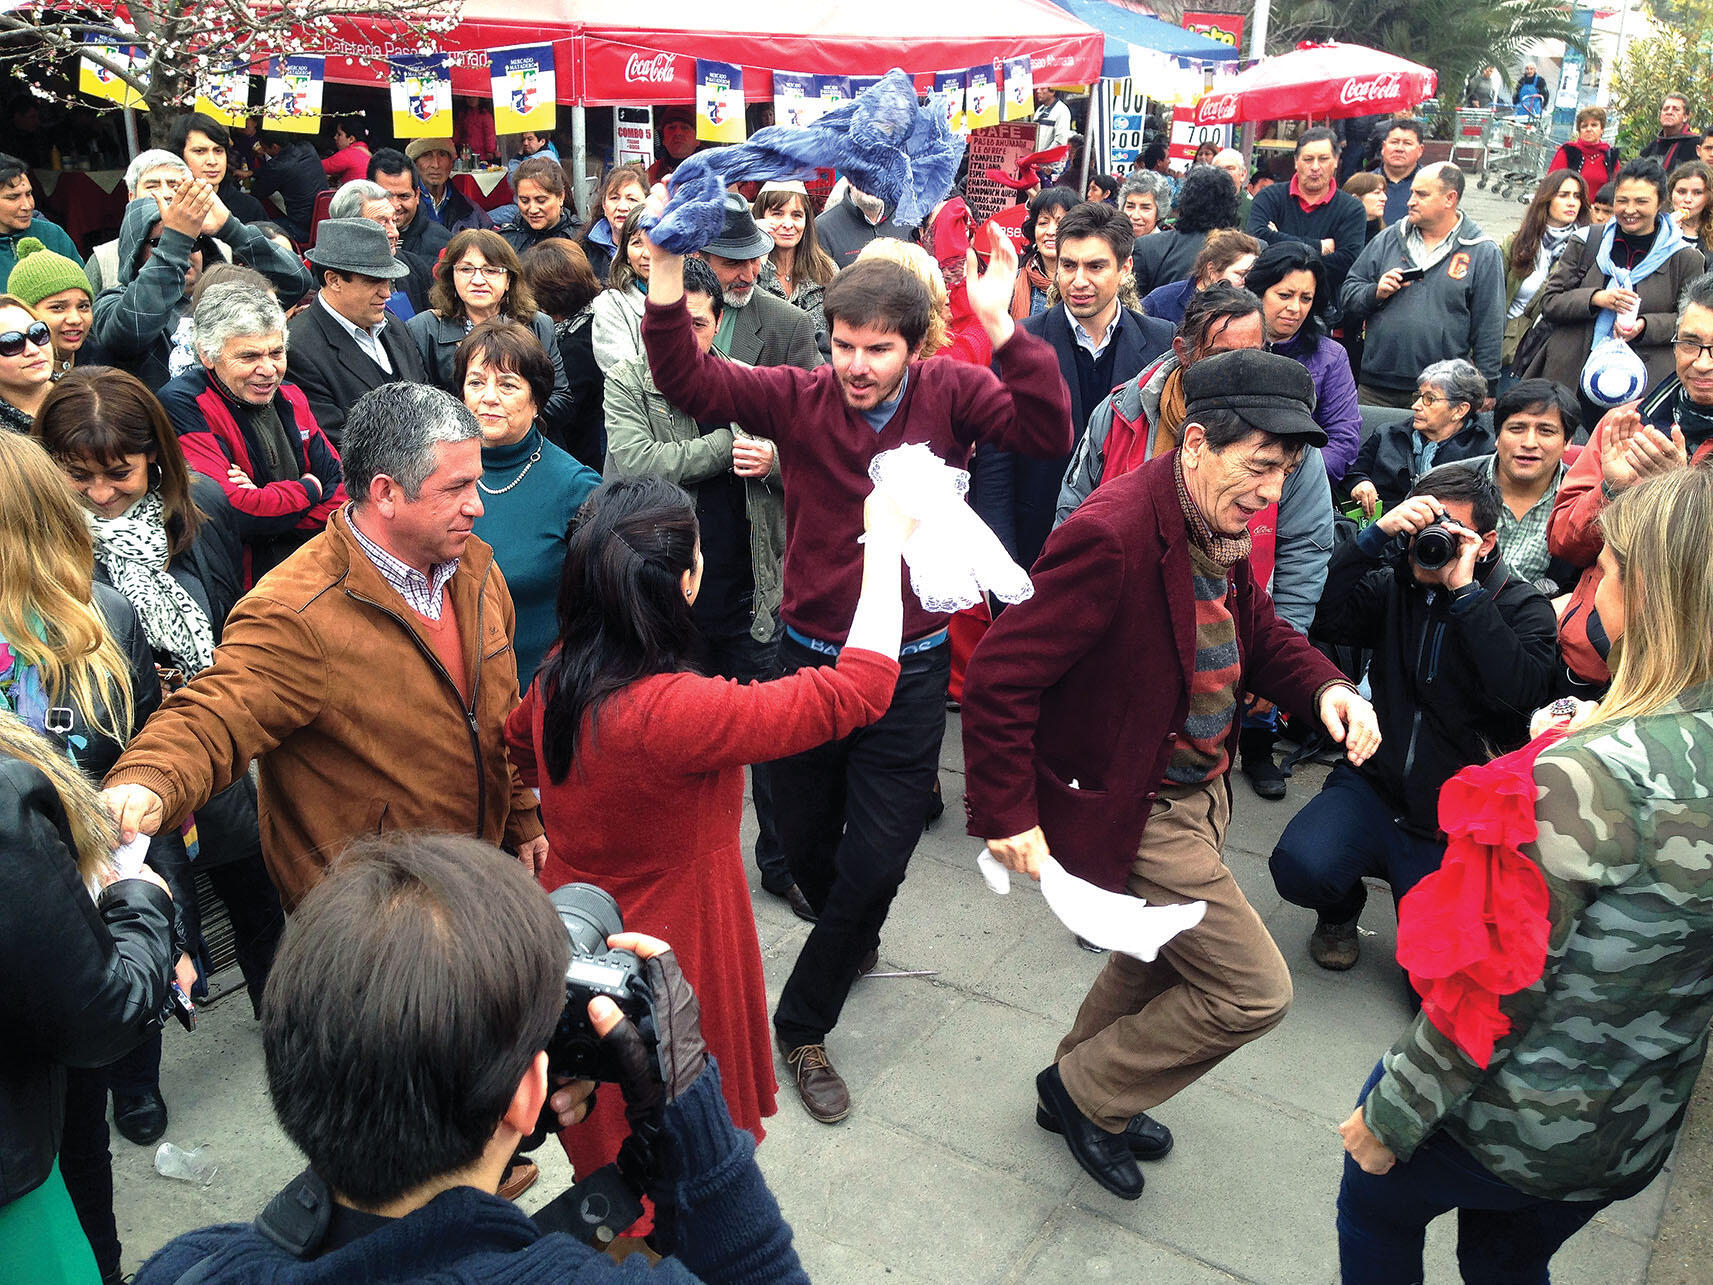 Giorgio Jackson, who went from leading a student protest movement to the Chilean congress, dances the cueca in the streets of Santiago. (Photo by guachacas.)